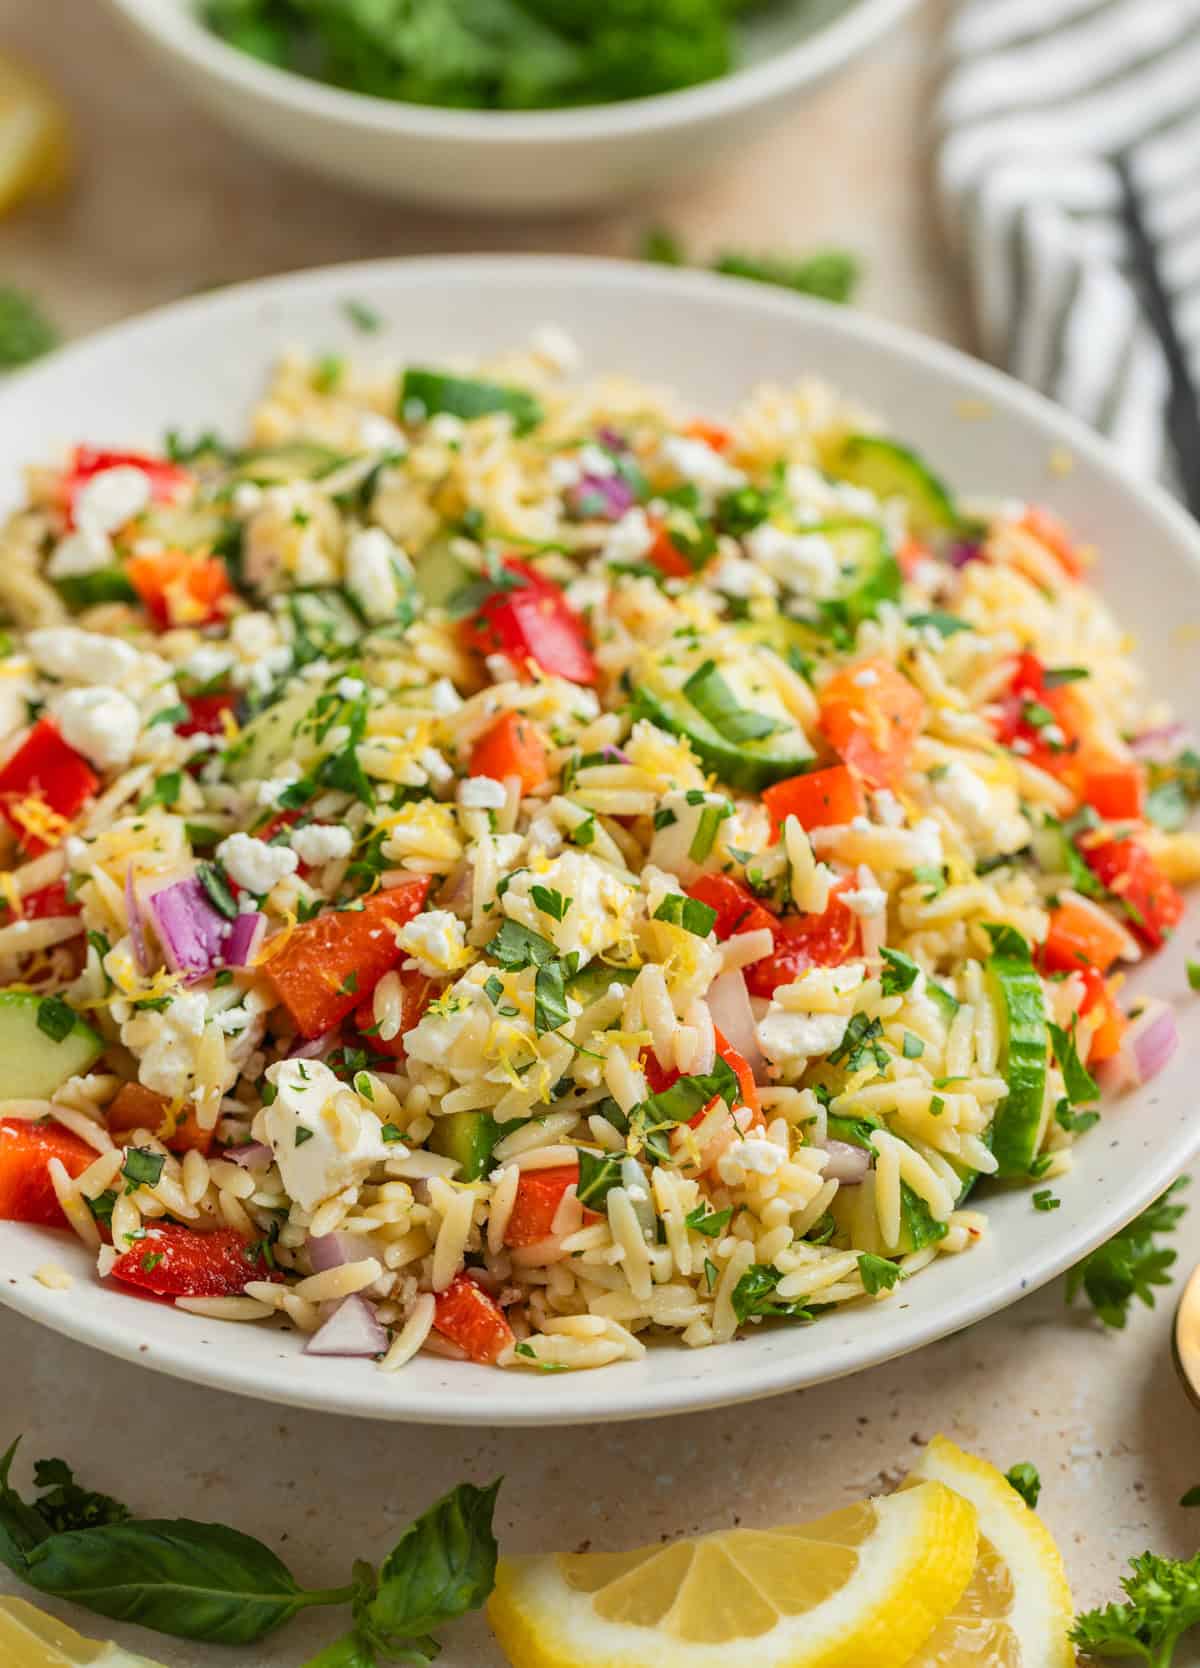 Orzo salad with feta, basil, parsley, cucumbers and more in white bowl.